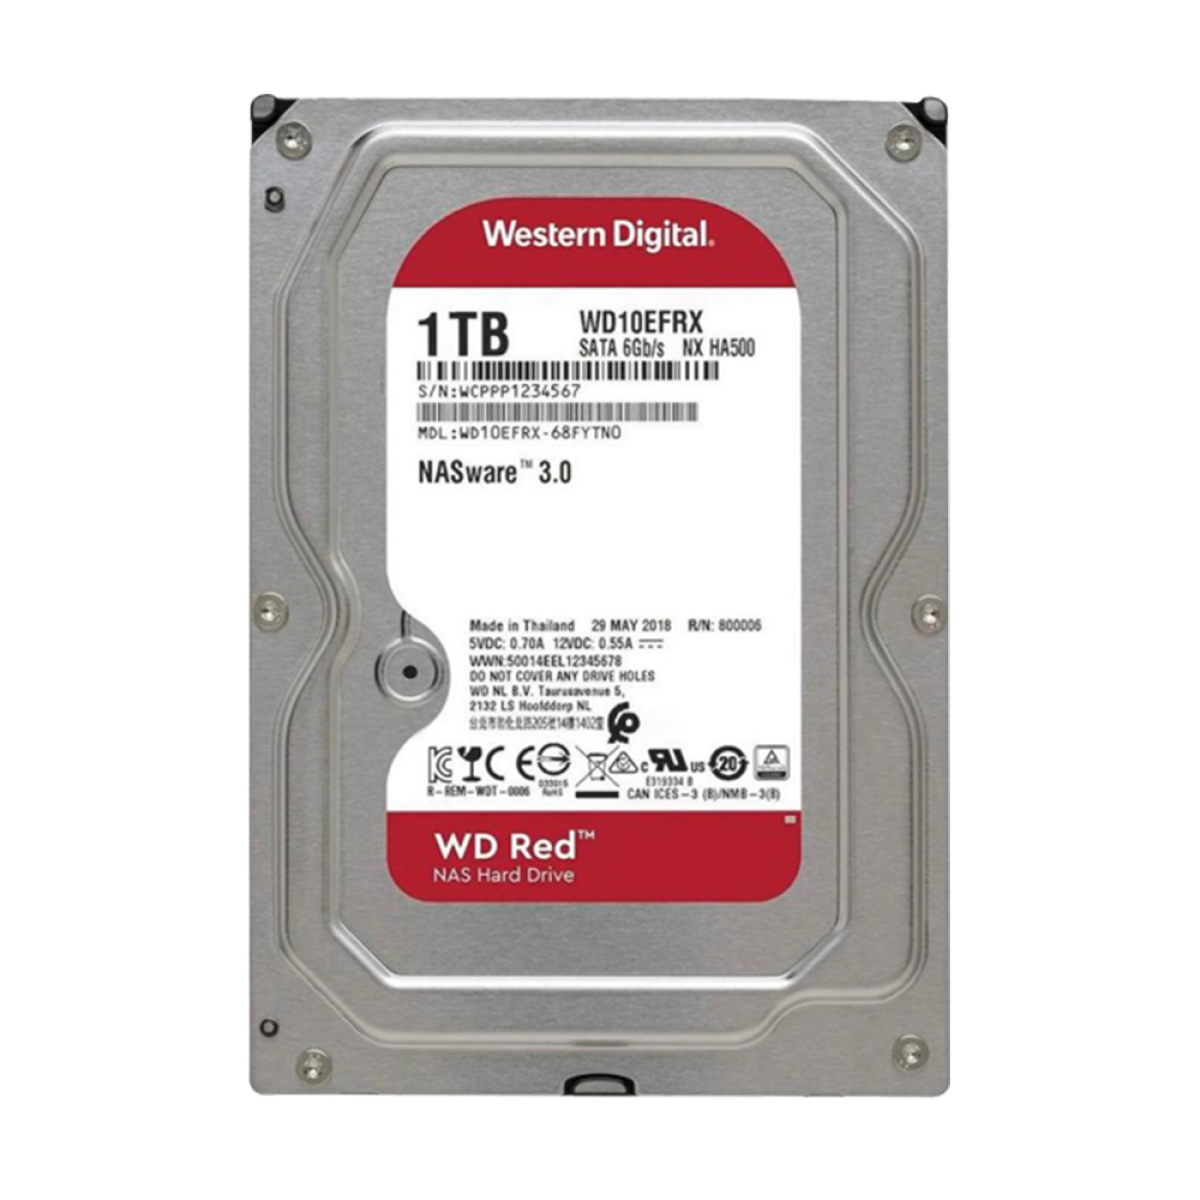 HD WD Red, 1TB, SATA, 5400RPM, NAS, 3.5', WD10EFRX